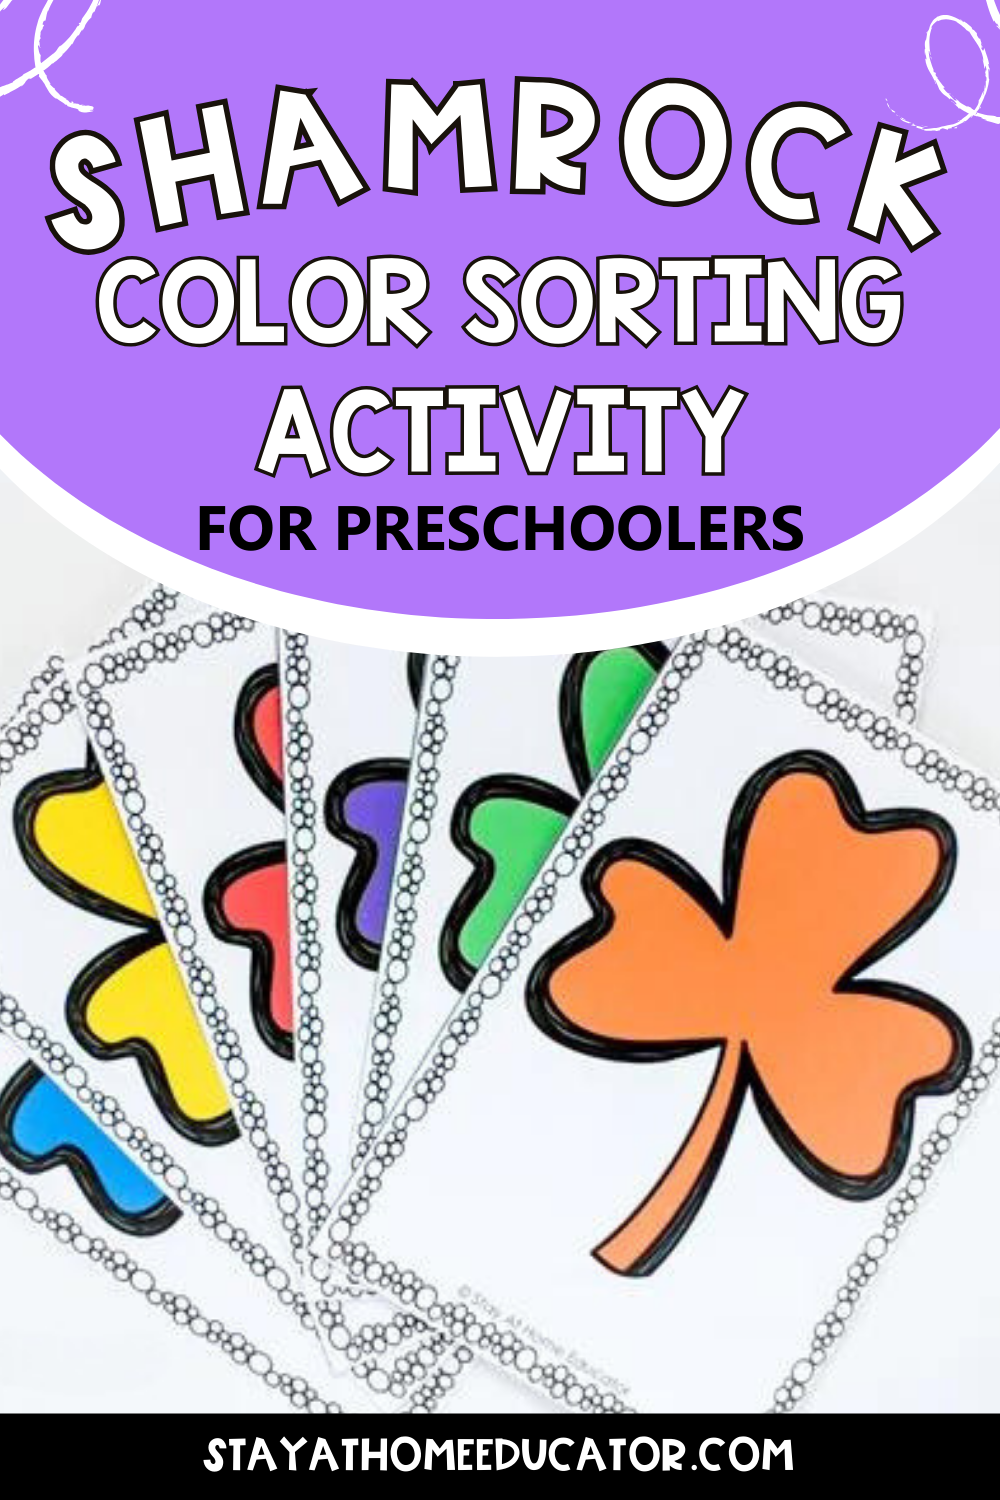 rainbow shamrock color sorting cards in red, orange, yellow, green, blue, and purple to use in St. Patricks Day preschool lesson plans | rainbow theme preschool lesson plans | color sorting activities for preschoolers and toddlers